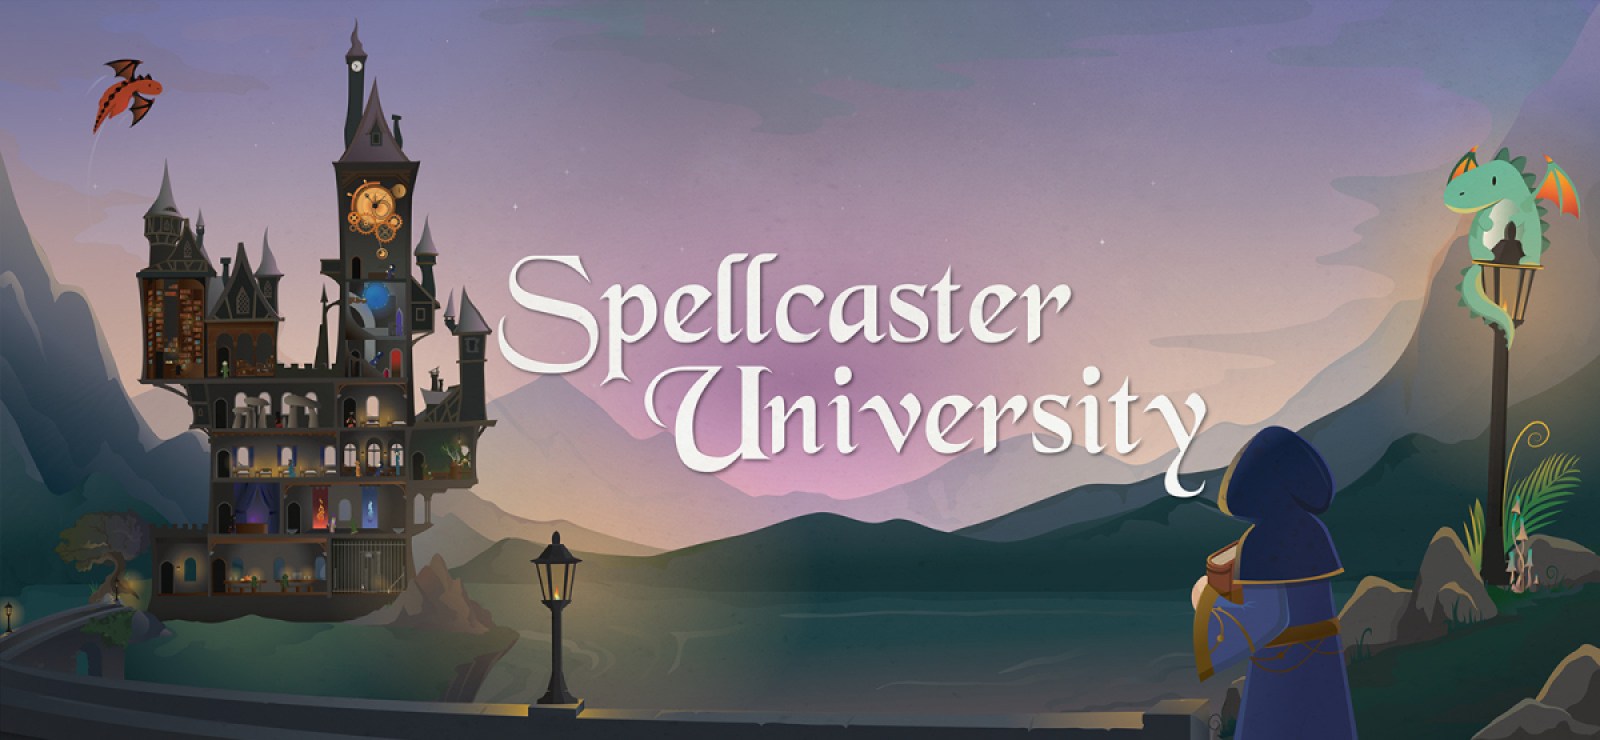 Spellcaster University's artwork, featuring a magical castle